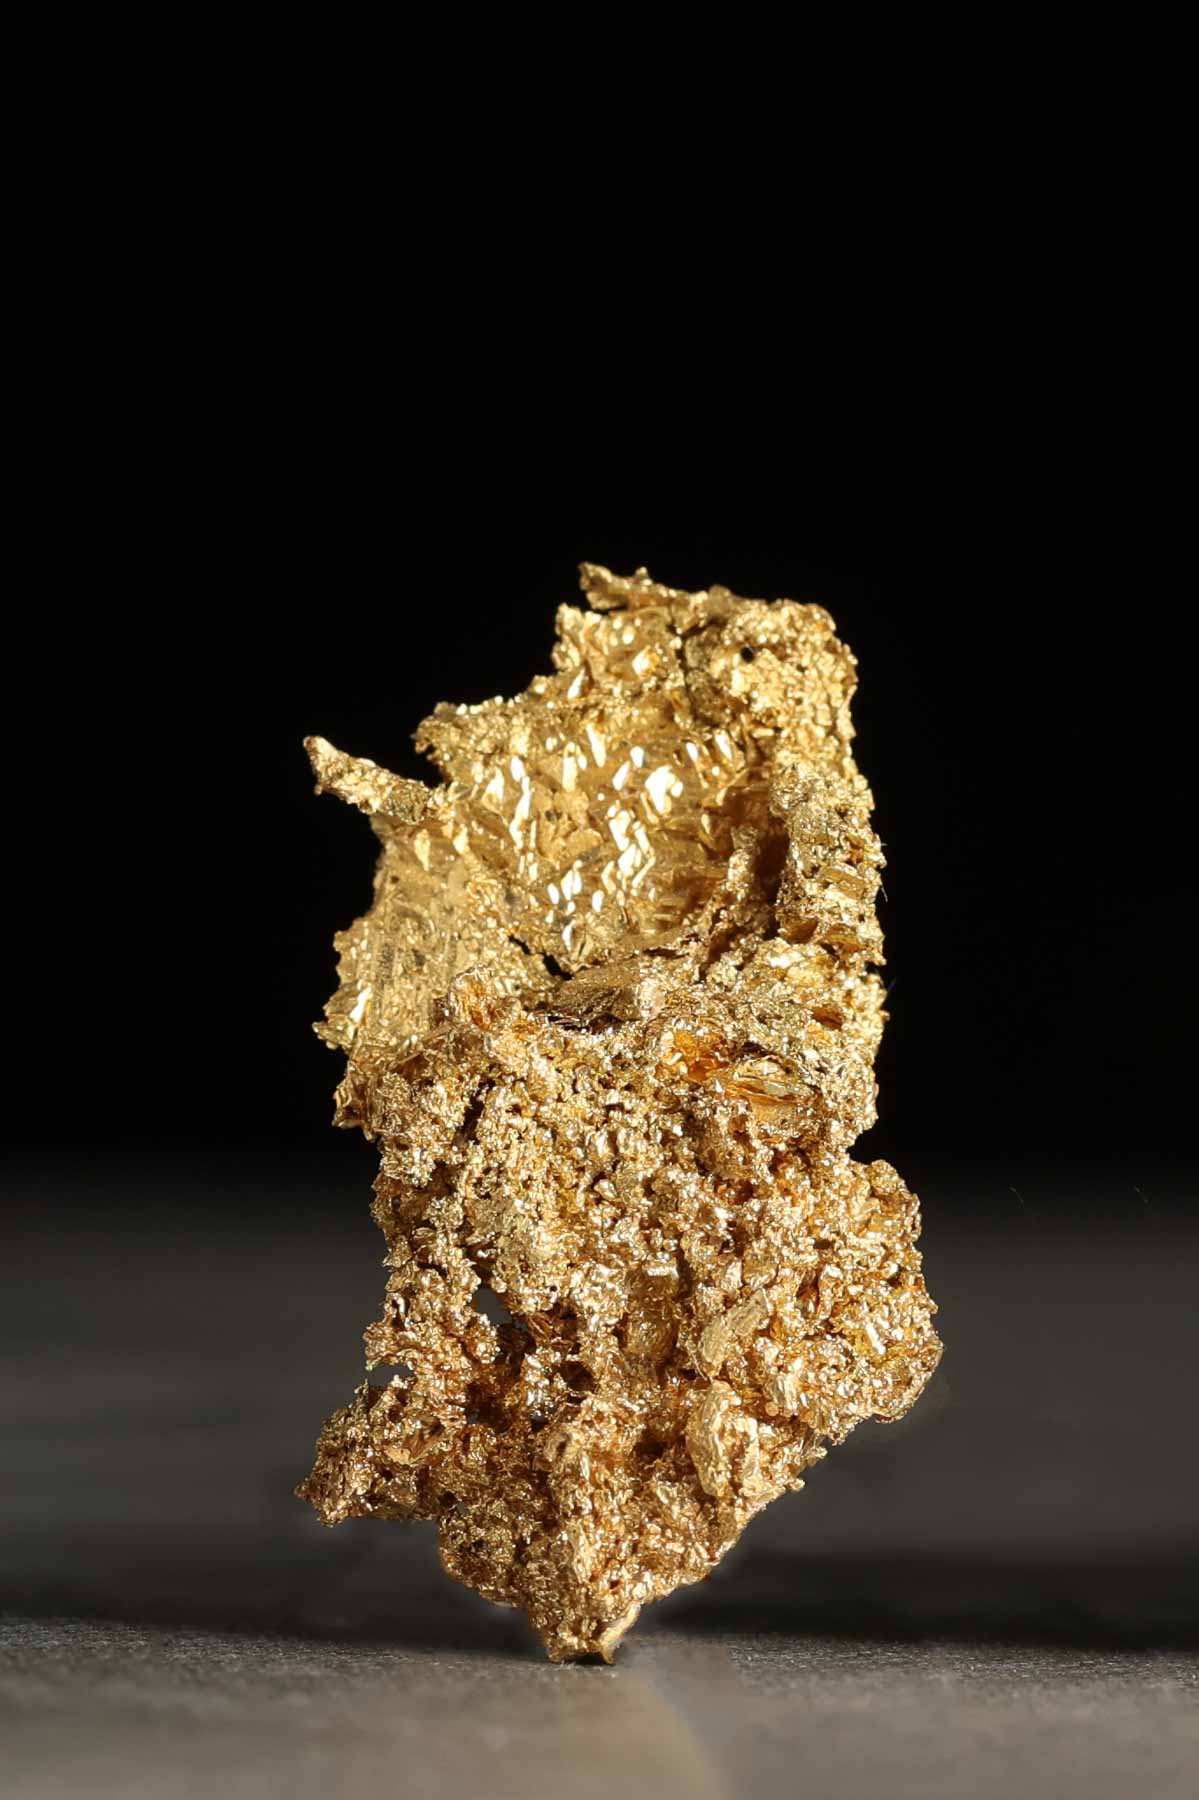 Sharp Crystal Surface - Natural Gold Crystal from the Oriental